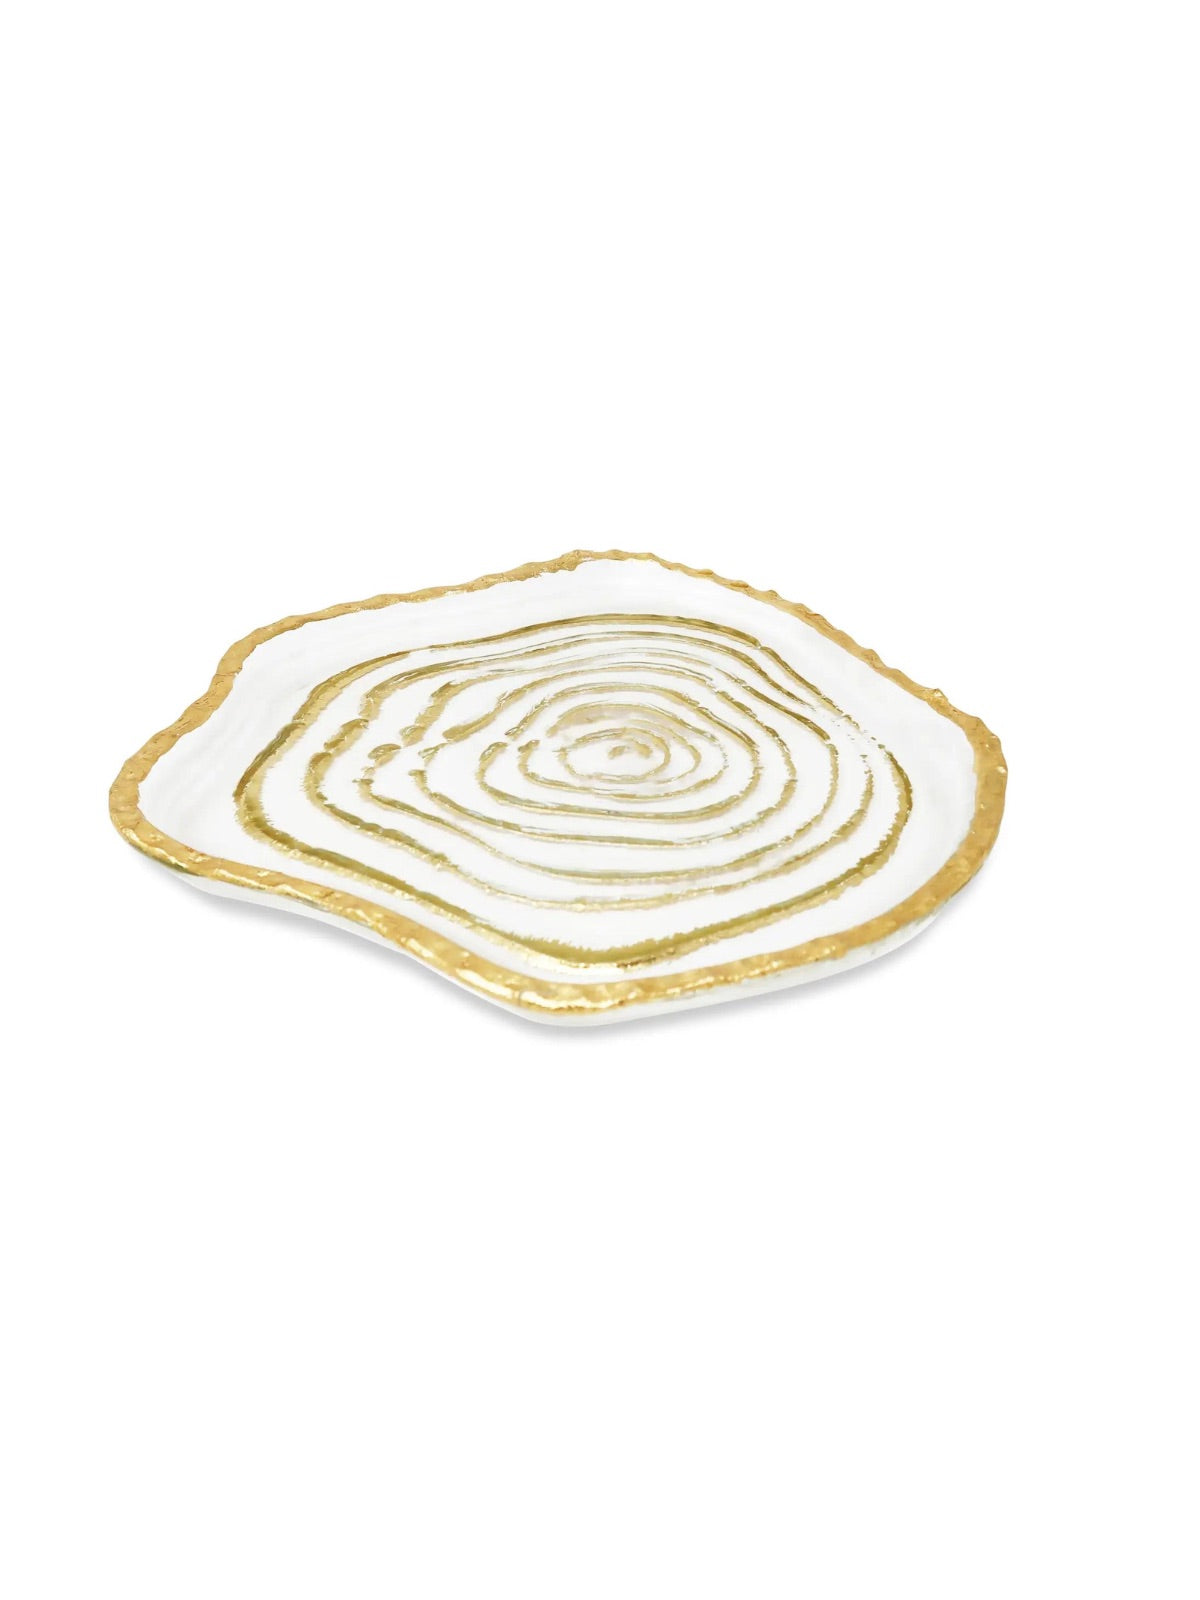 Set of 4 Round Glass Plates with Gold Grained Design, Measuring 8.5D Inches Sold by KYA Home Decor.